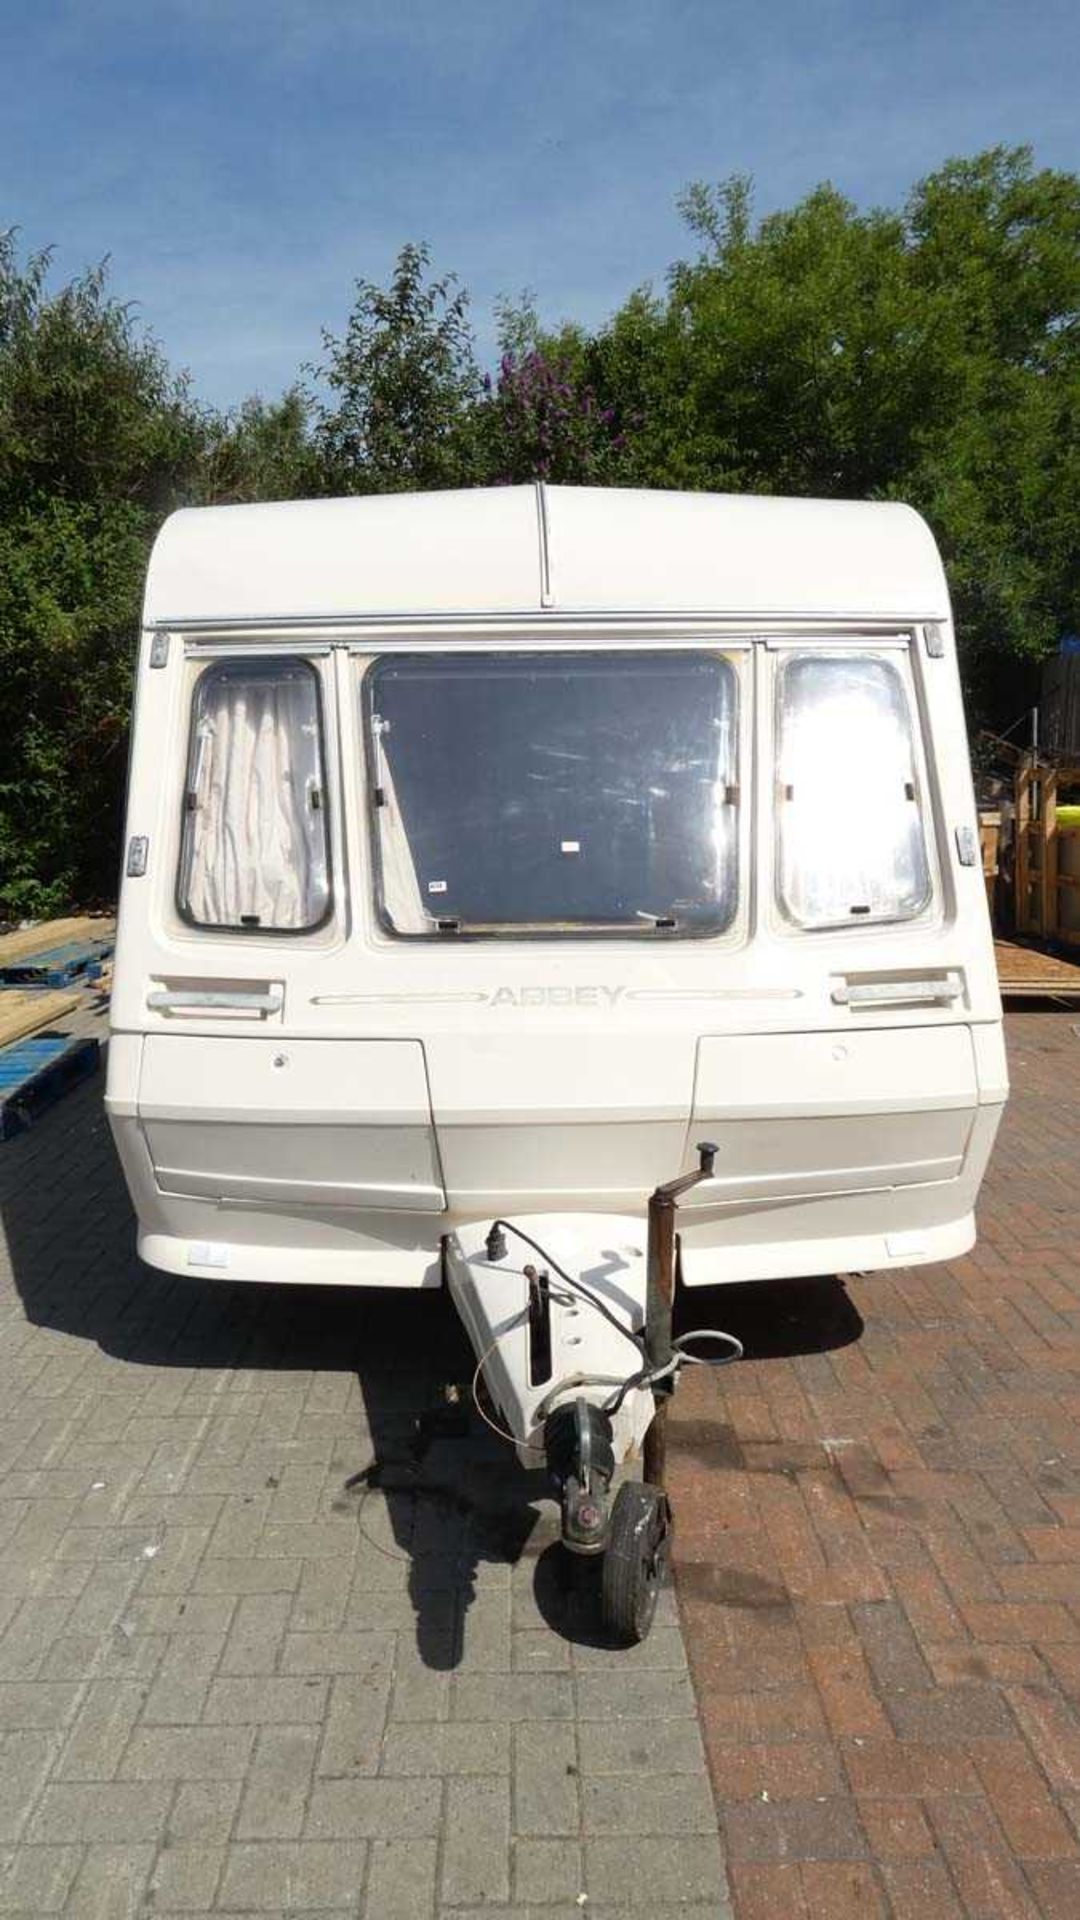 Abbey GTS215 2-berth caravan with locks and various other accessories